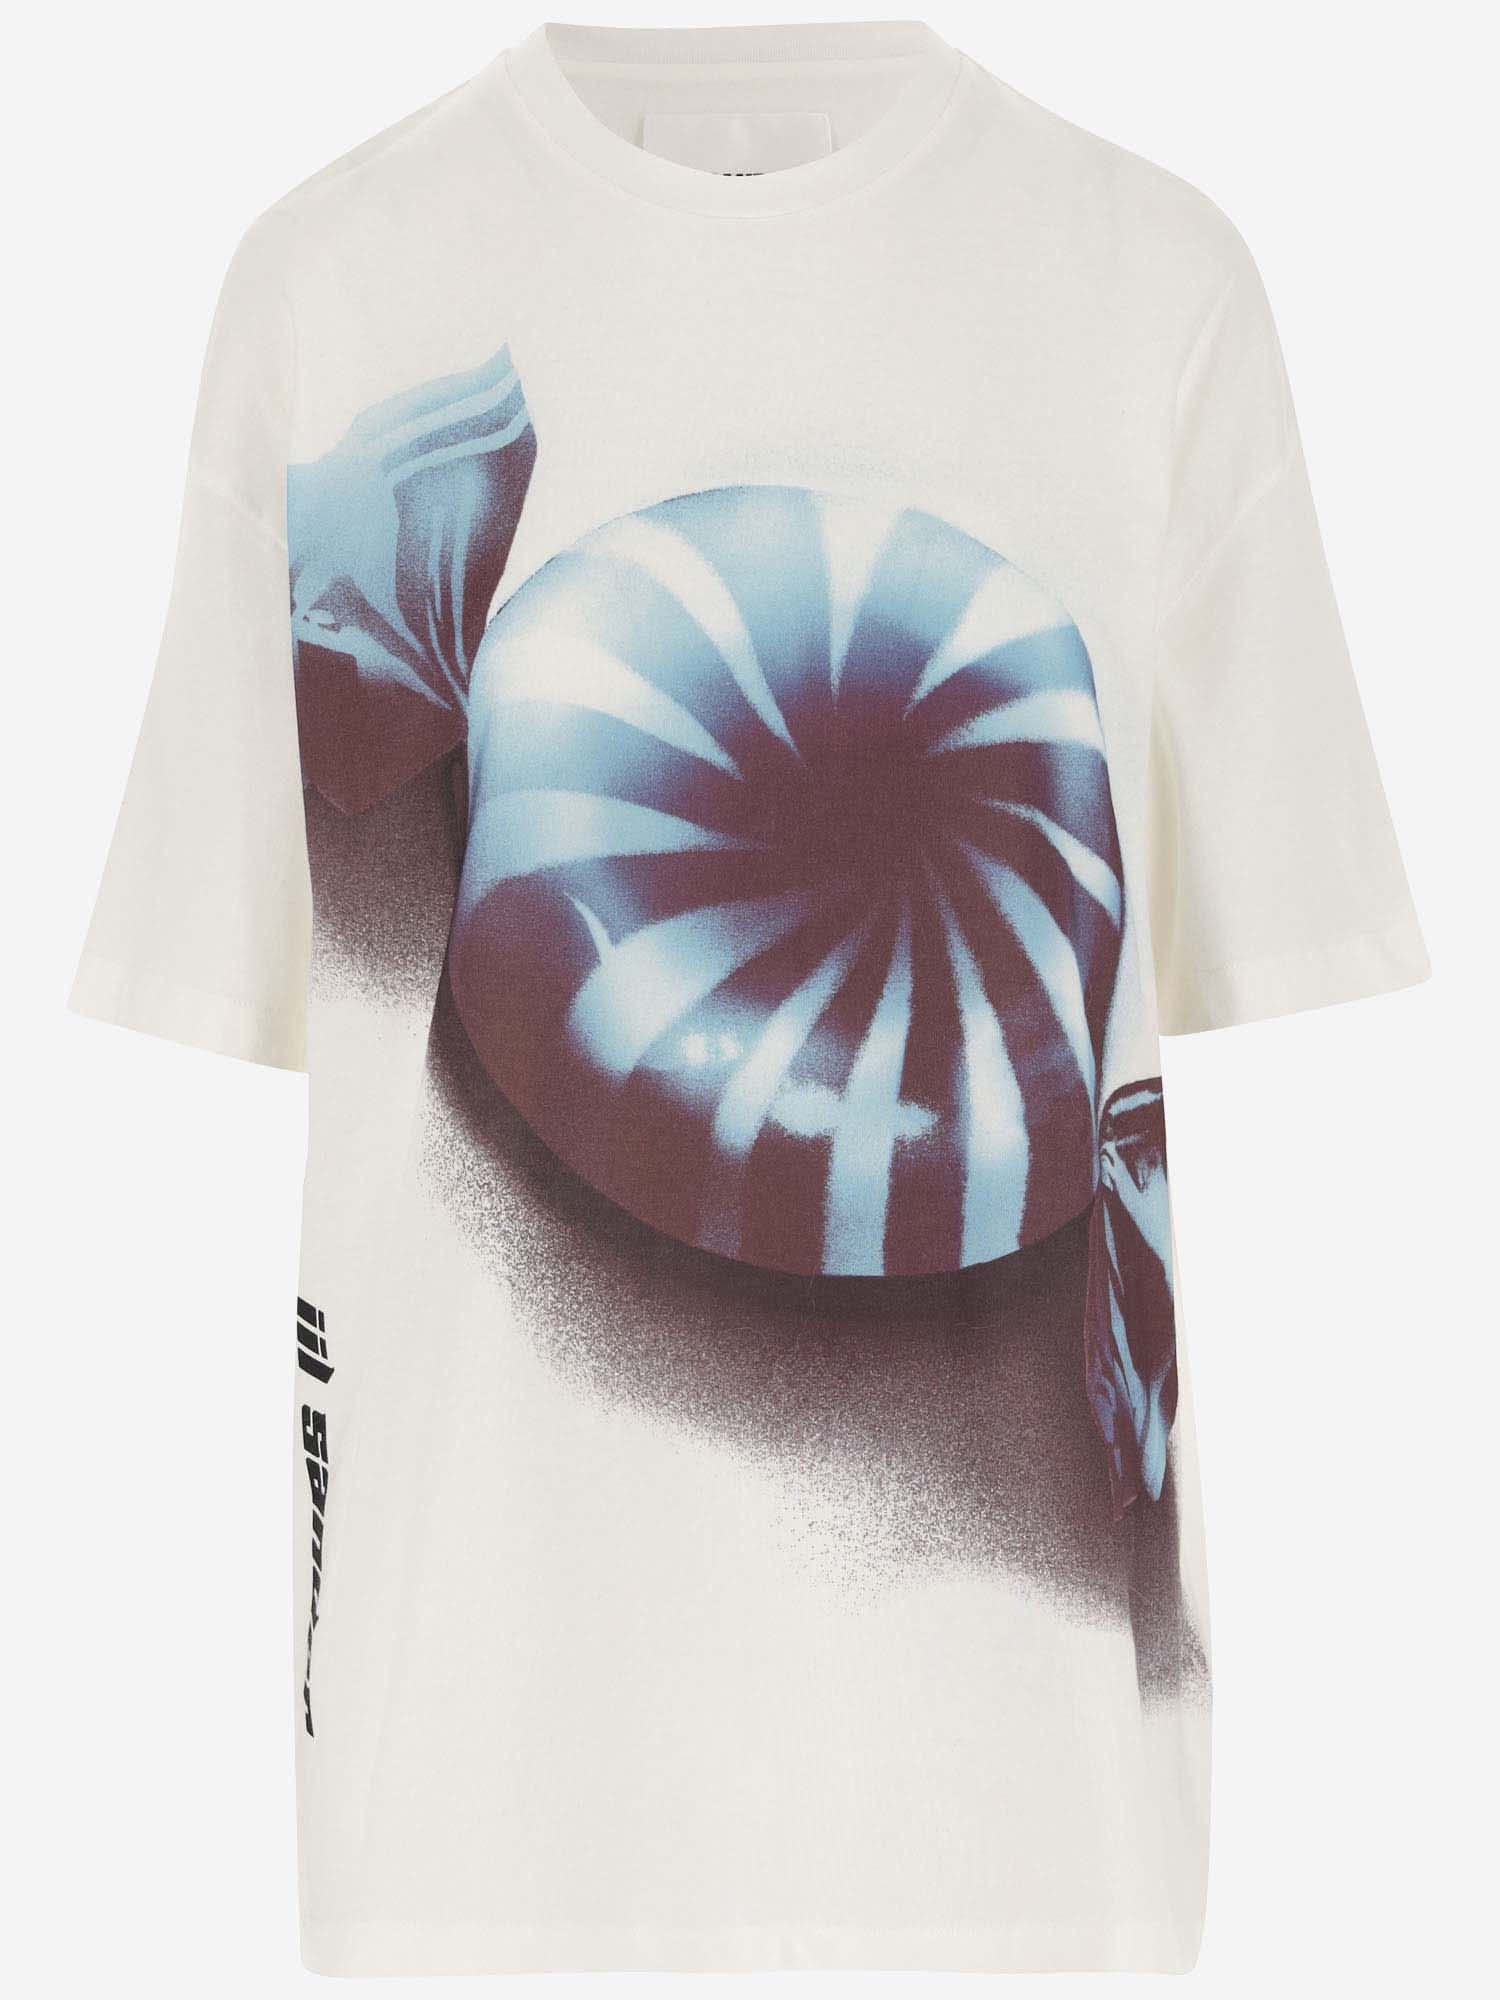 JIL SANDER OVERSIZED T-SHIRT WITH GRAPHIC AND LOGO PRINT